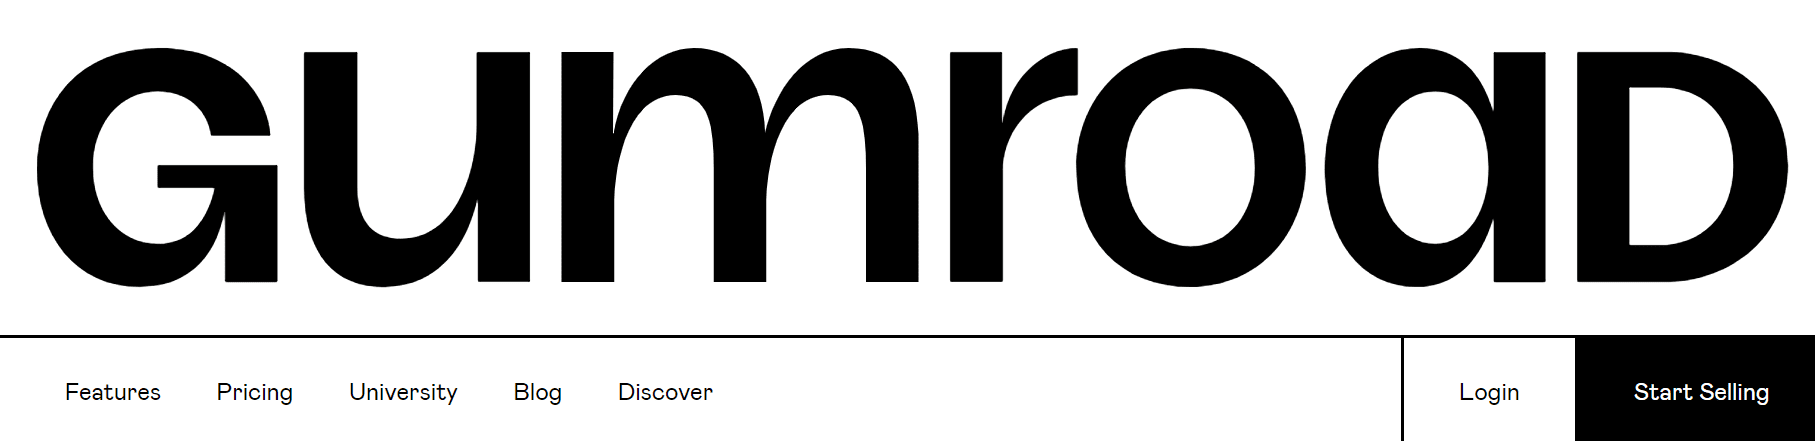 Gumroad's home page shows its own name in a huge font above the actual website.